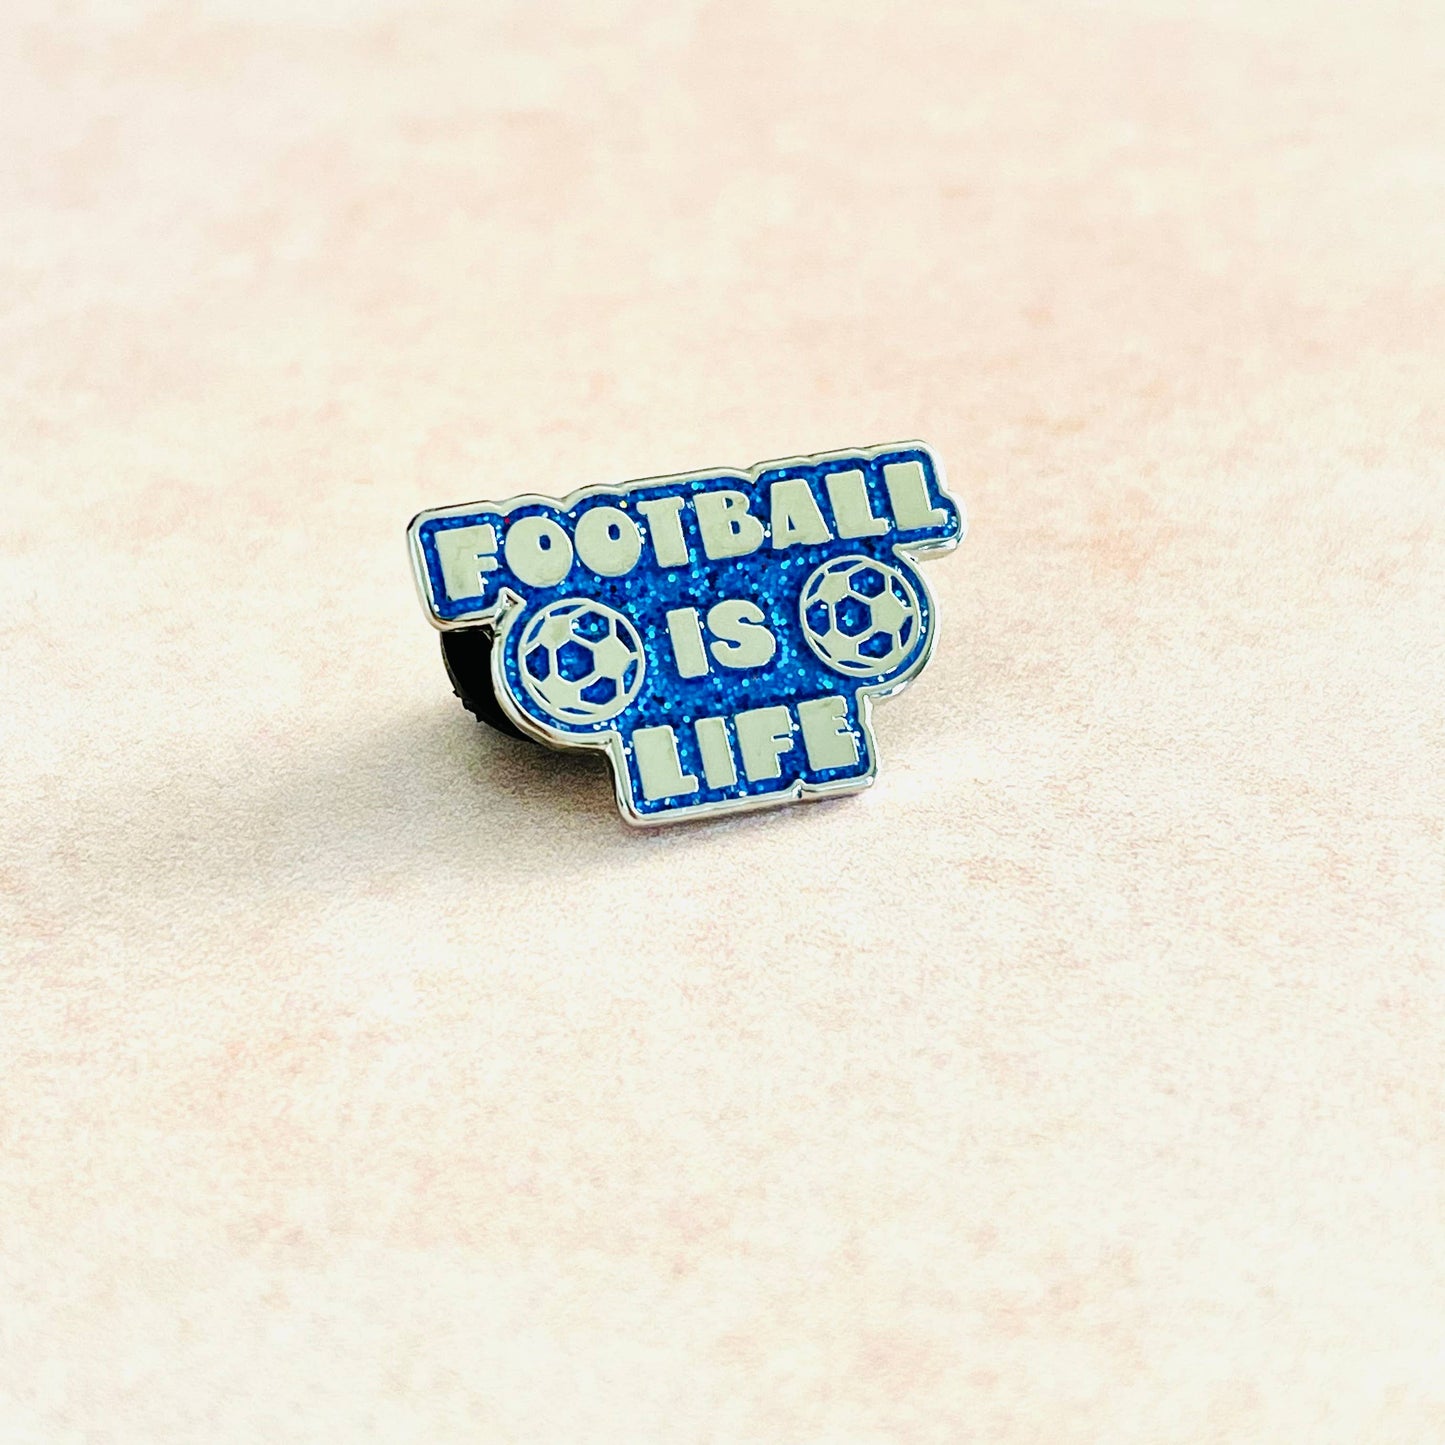 The Silver Spider - Football is Life Enamel Lapel Pin Ted Lasso soccer TV